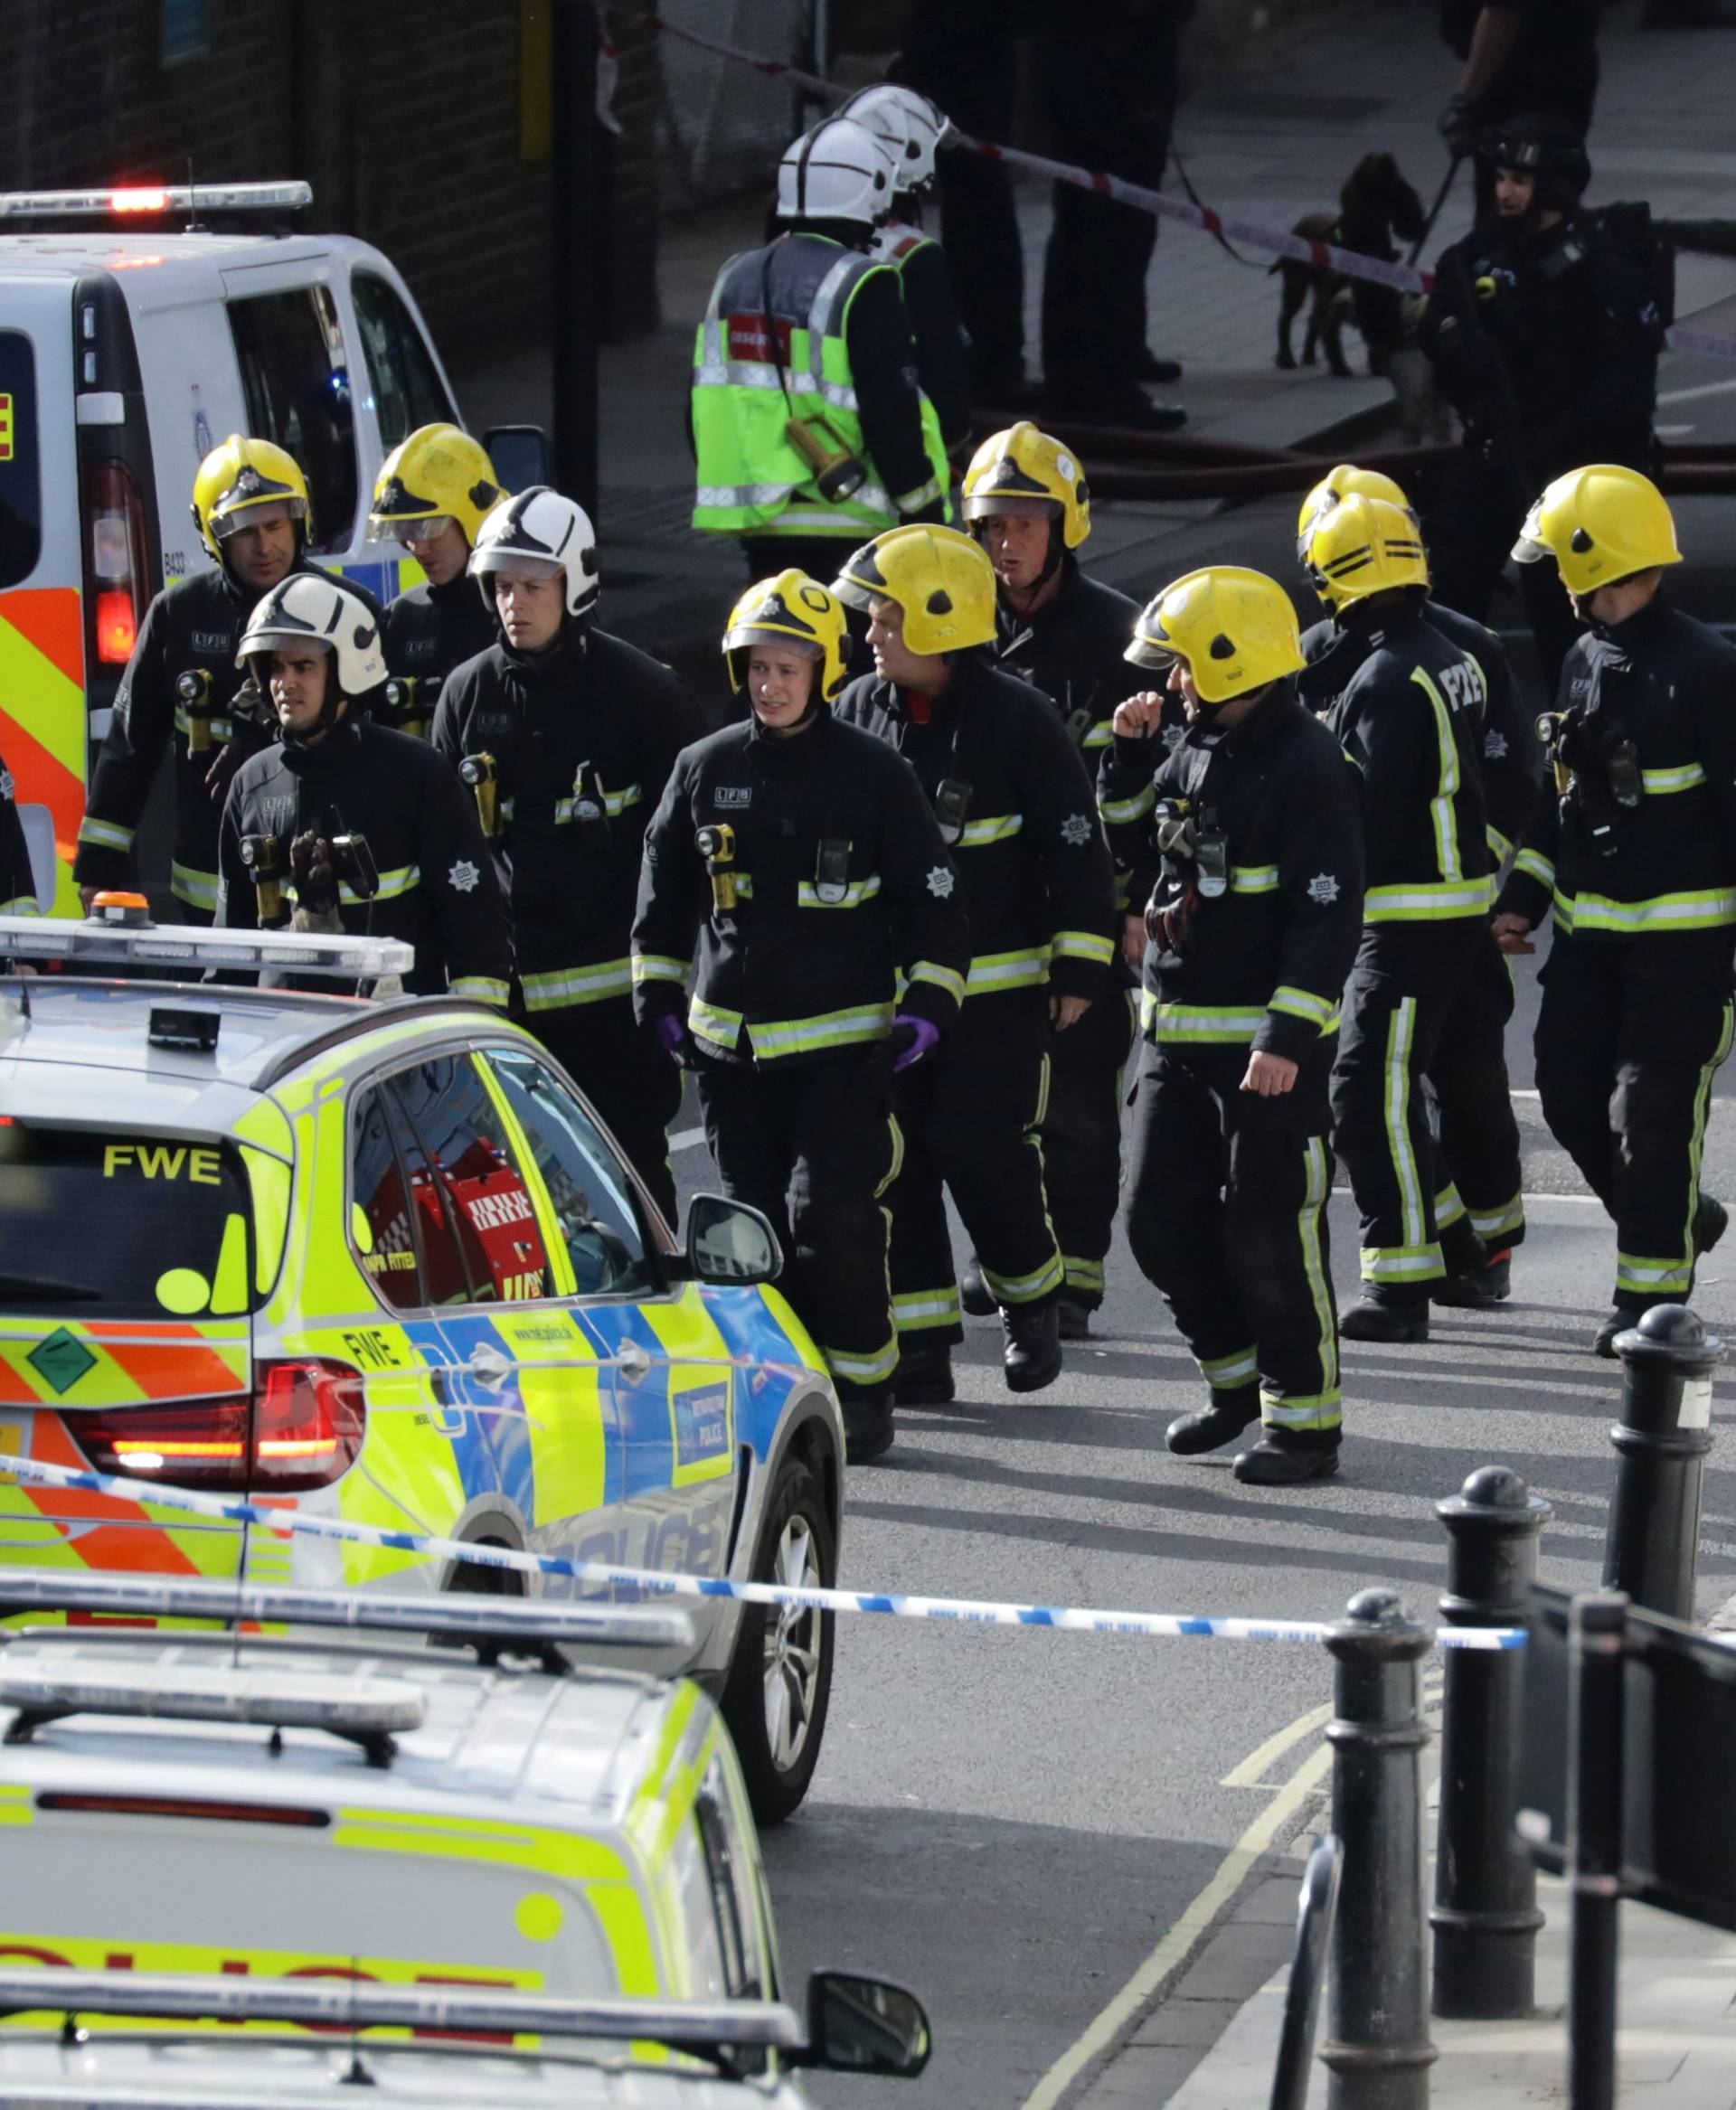 Members of the emergency services work near Parsons Green tube station in London